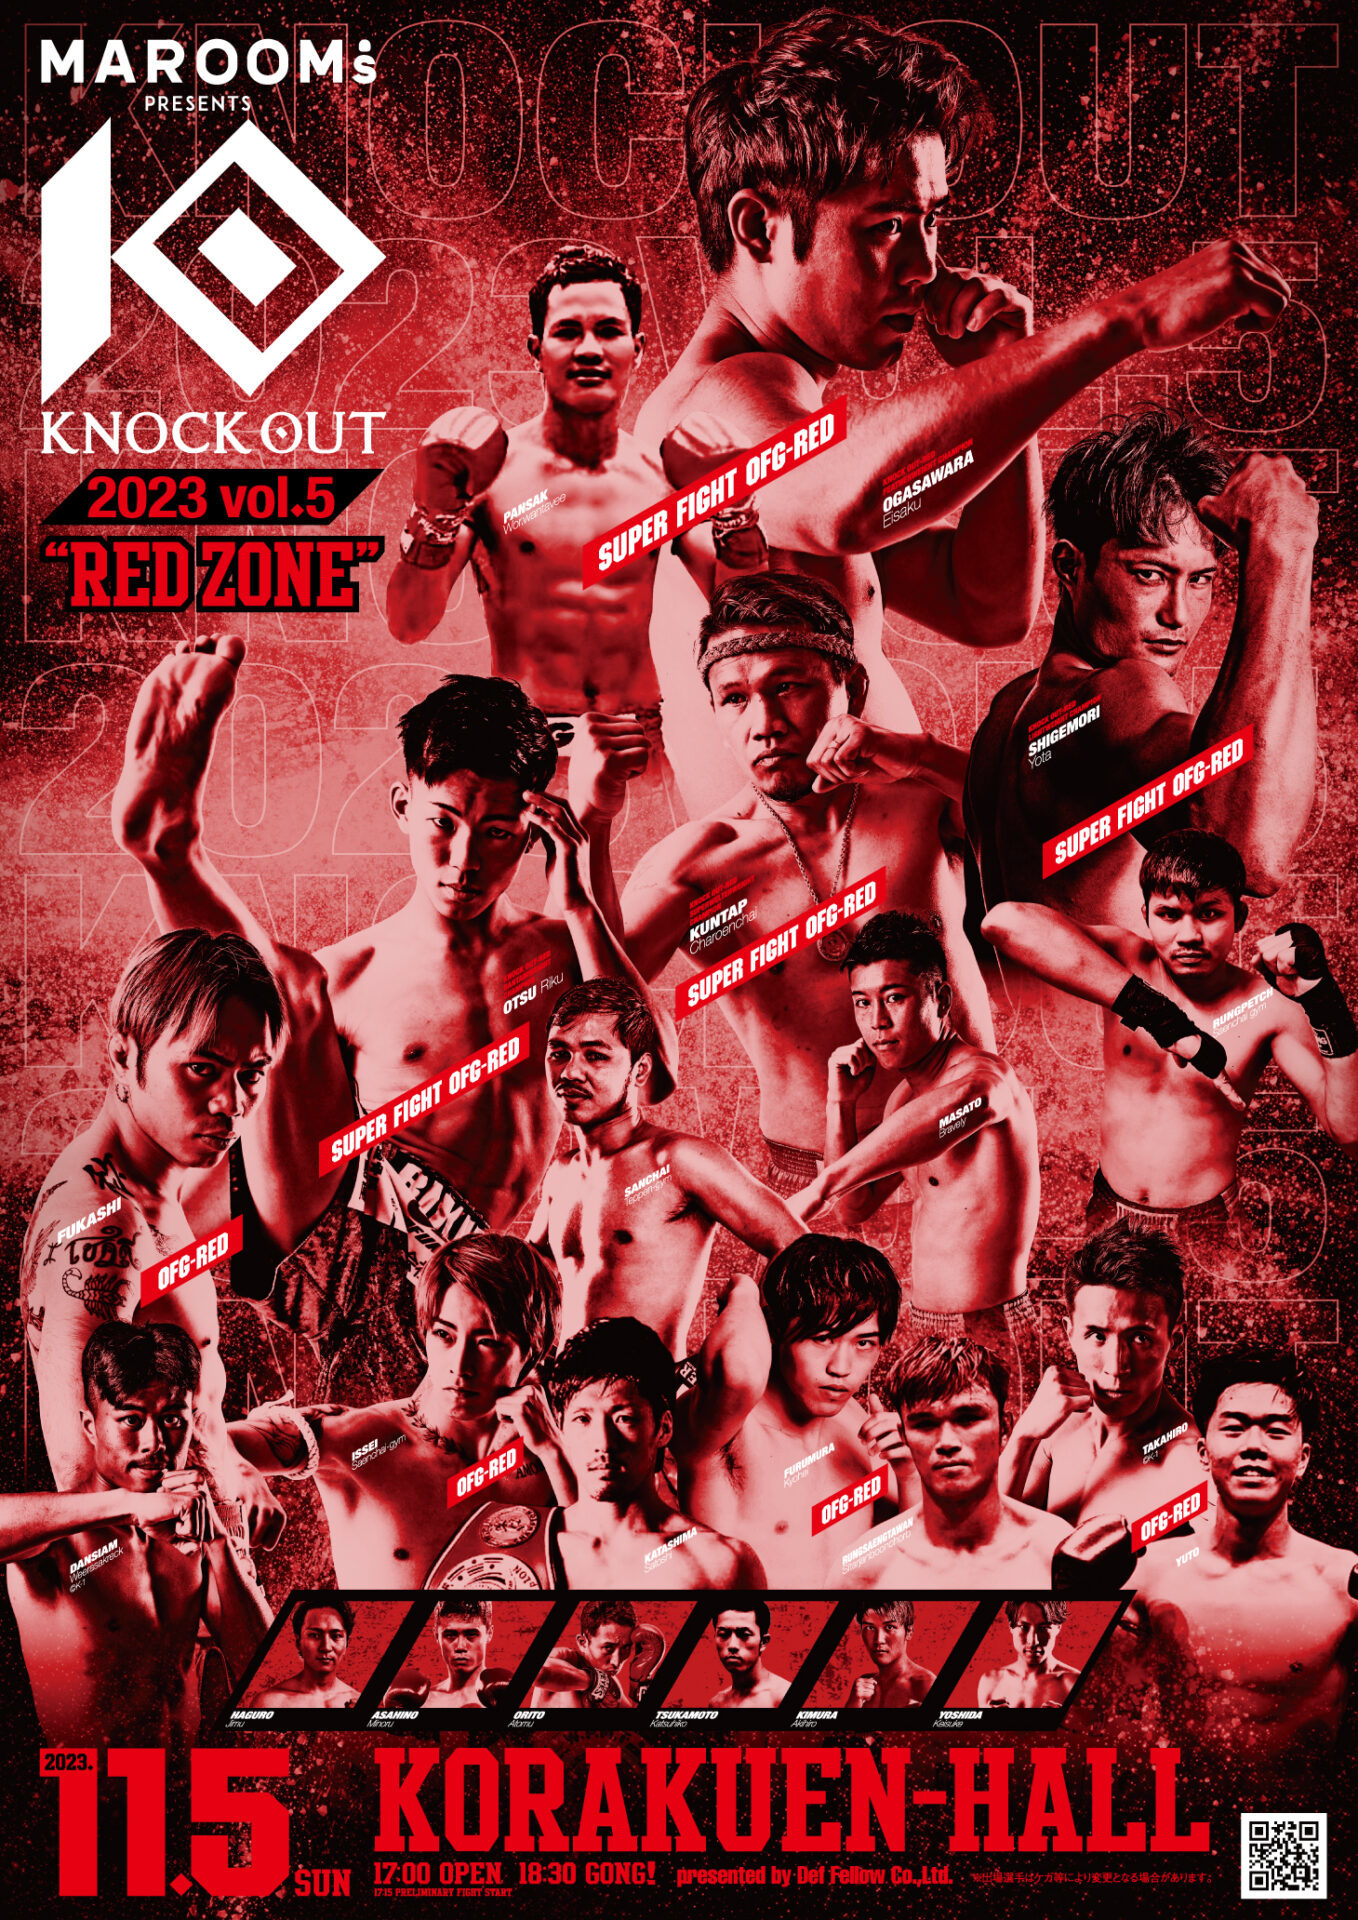 『KNOCK OUT 2023 vol.5 “RED ZONE”』が11月5日（日）に後楽園ホールで行われる